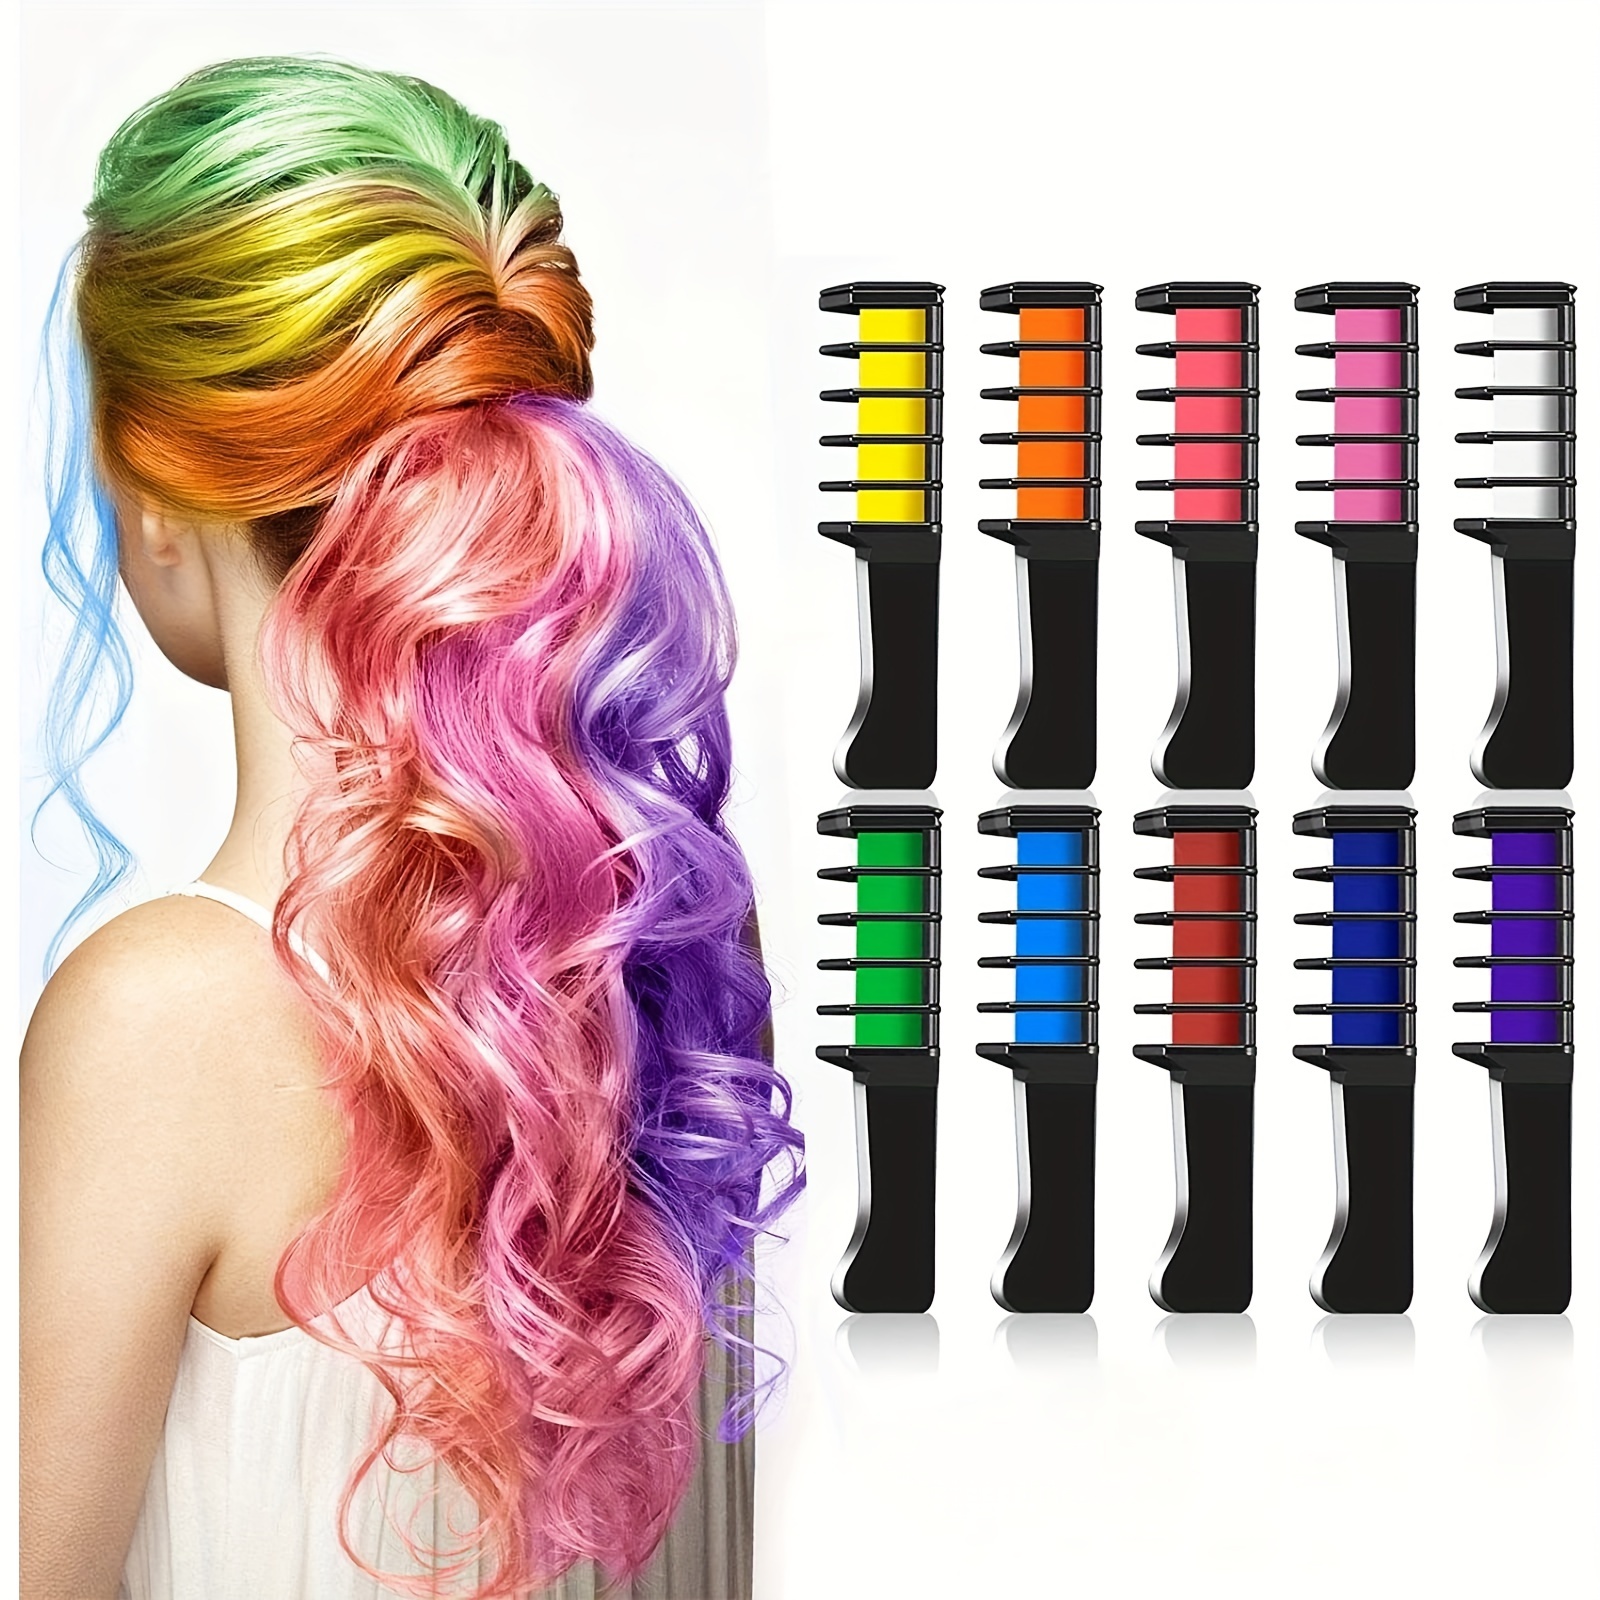 Maydear 10 Colors Hair Chalk for Girls Washable Hair Chalk Comb Set,  Temporary Hair Dye for Kids Christmas Stocking Stuffers, Teen Girl Gifts  Trendy